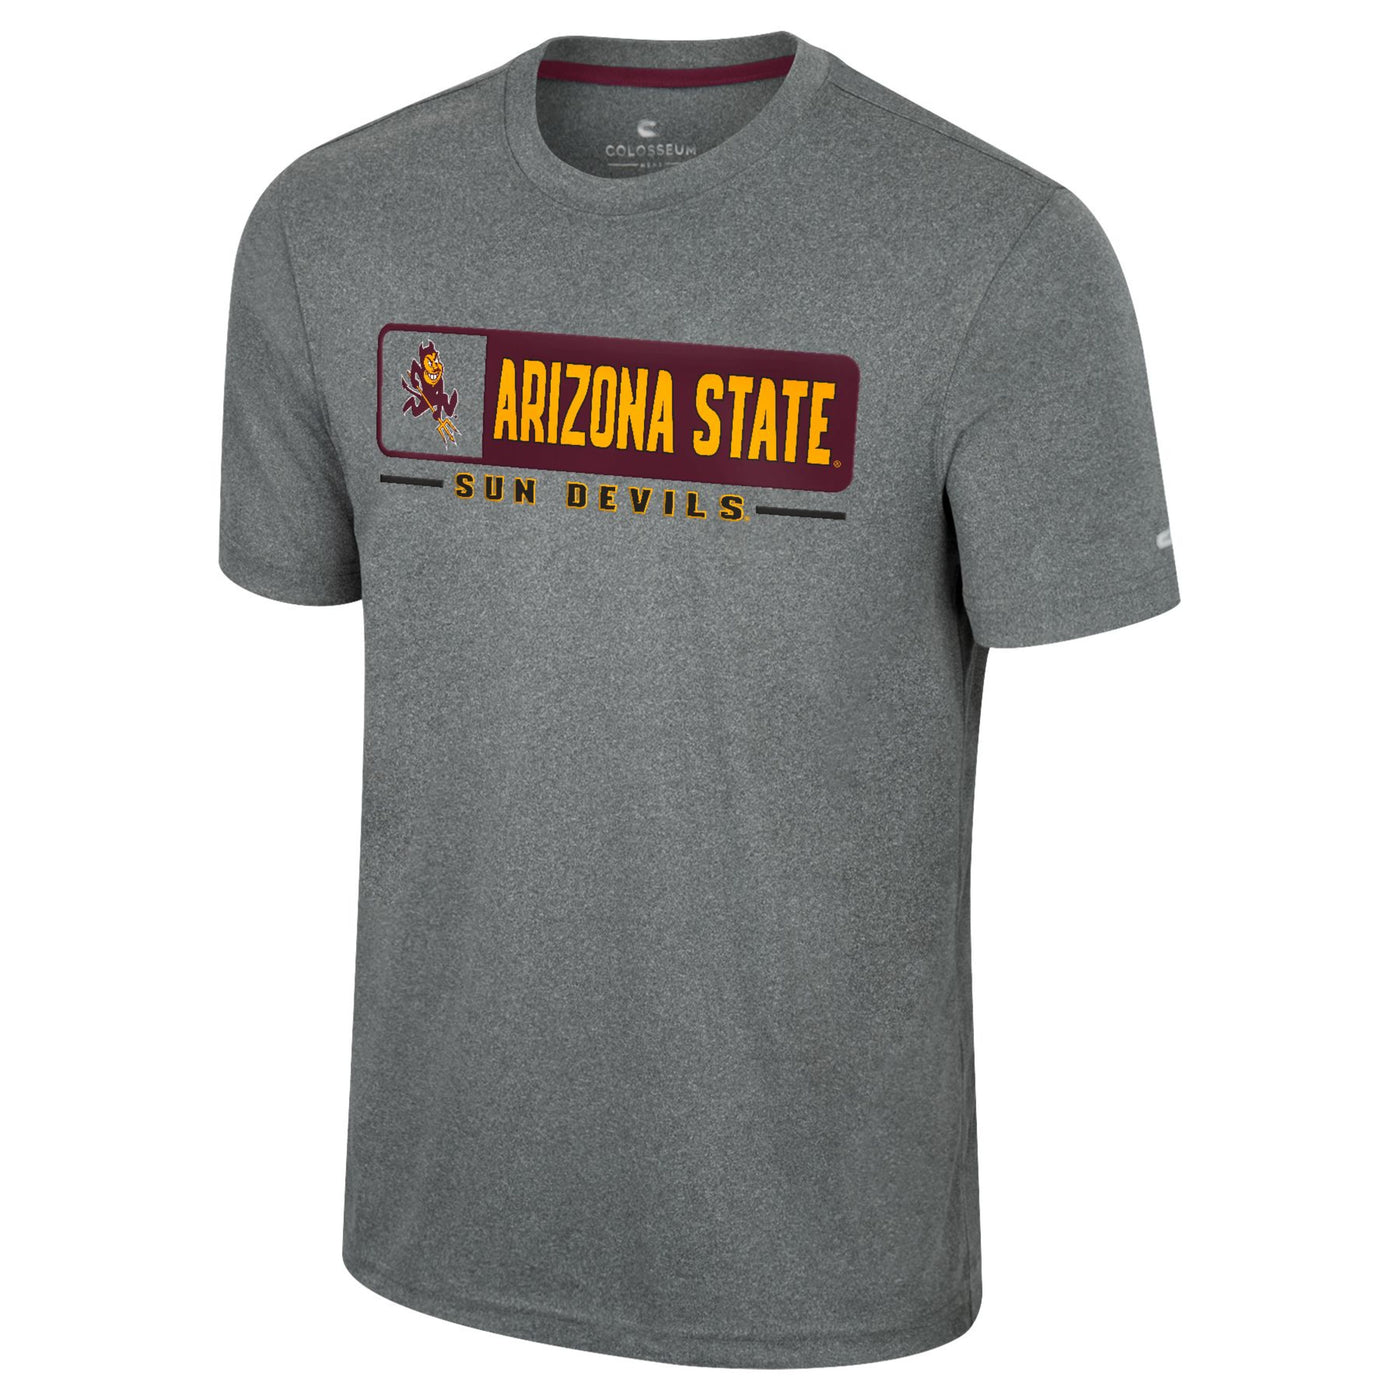 ASU grey athletic material short sleeve shirt. On the chest is a maroon filled in box with 